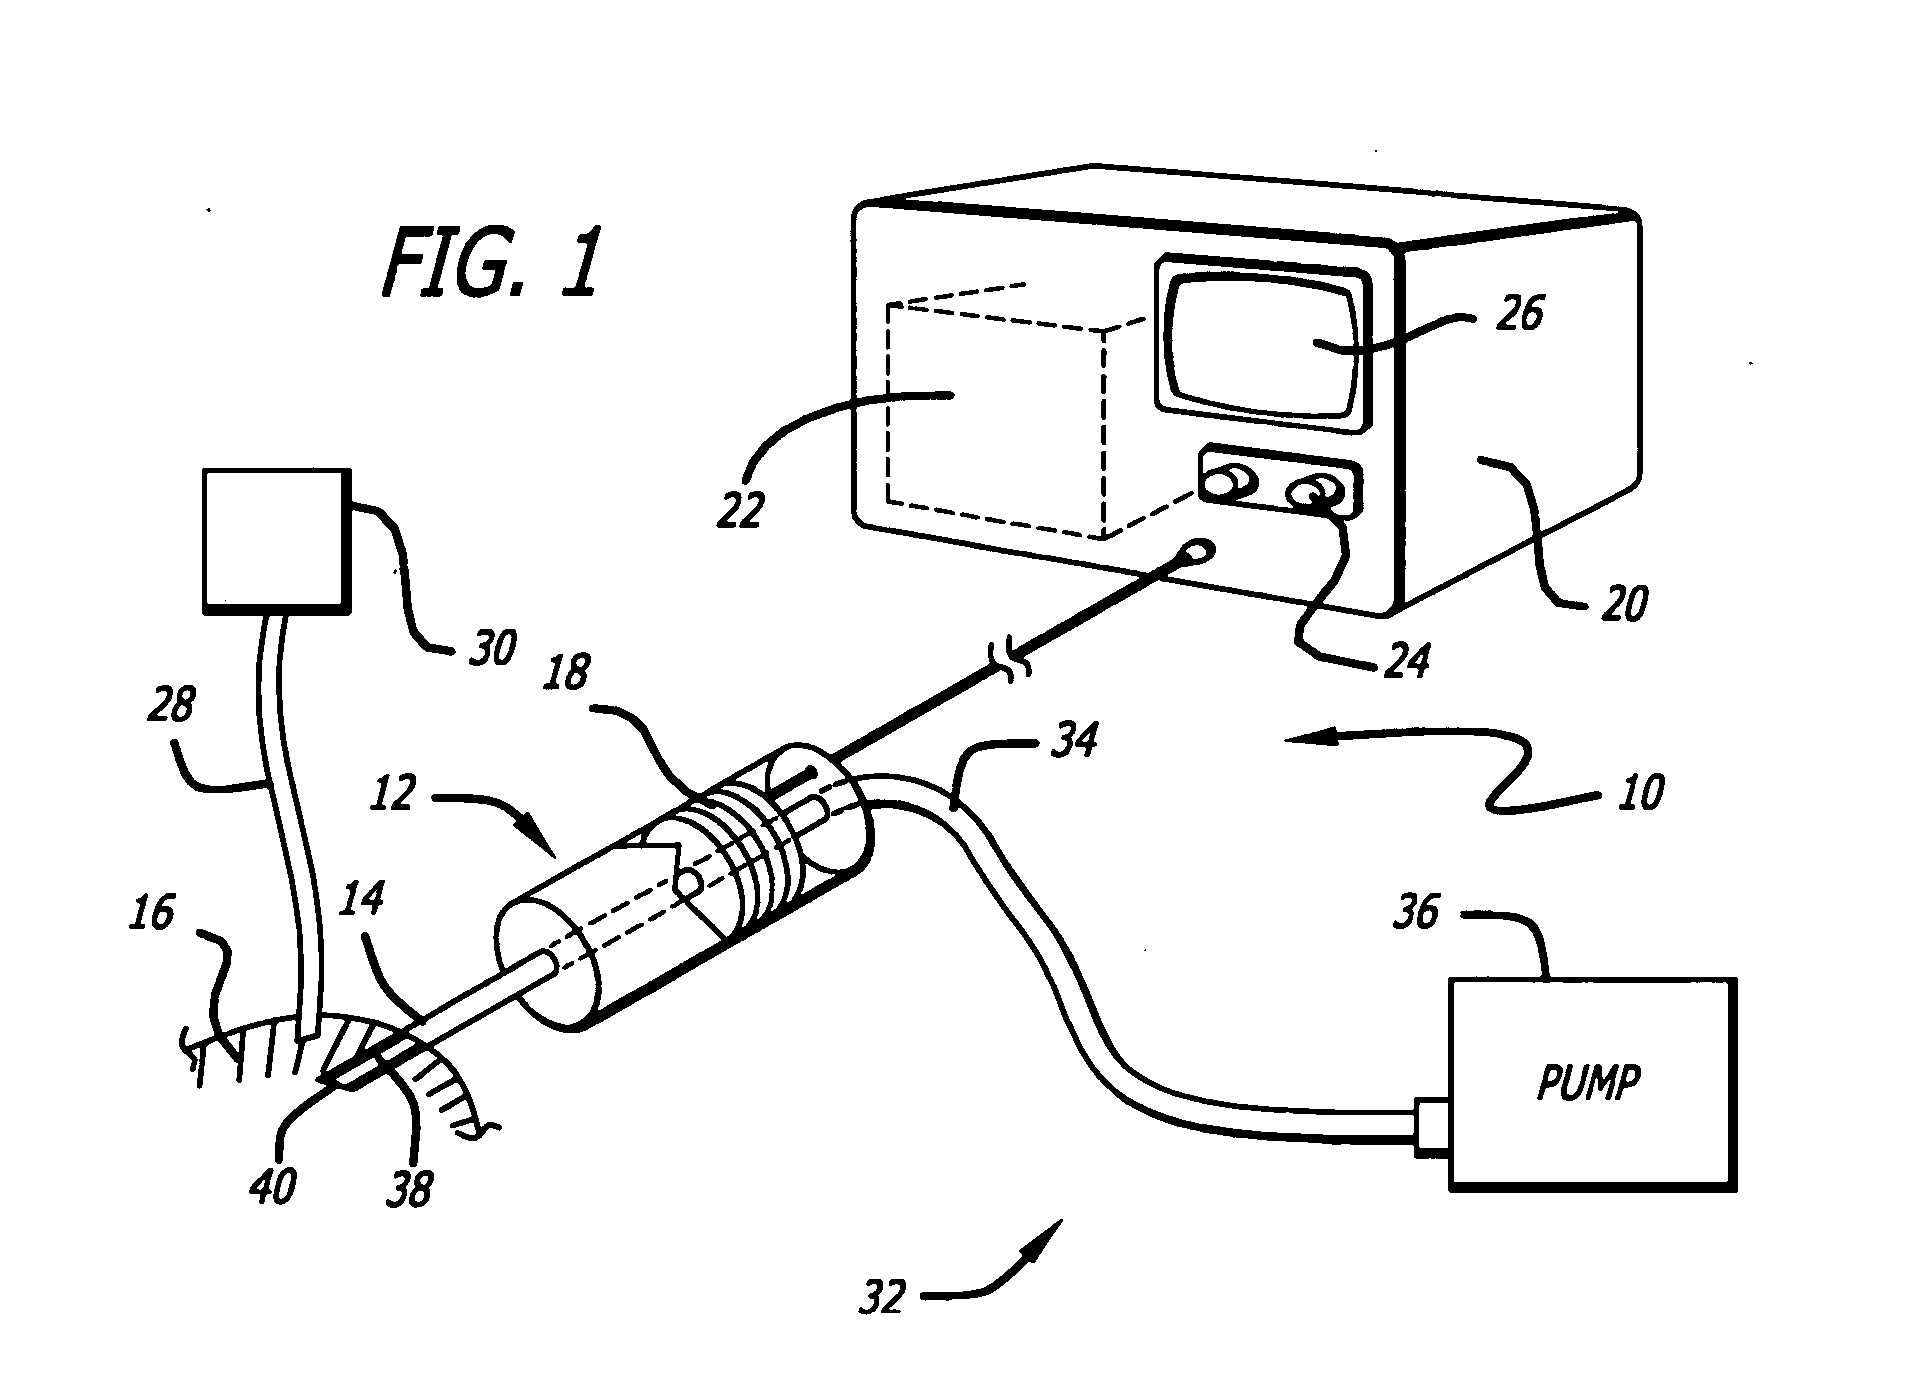 Aspiration system for medical devices